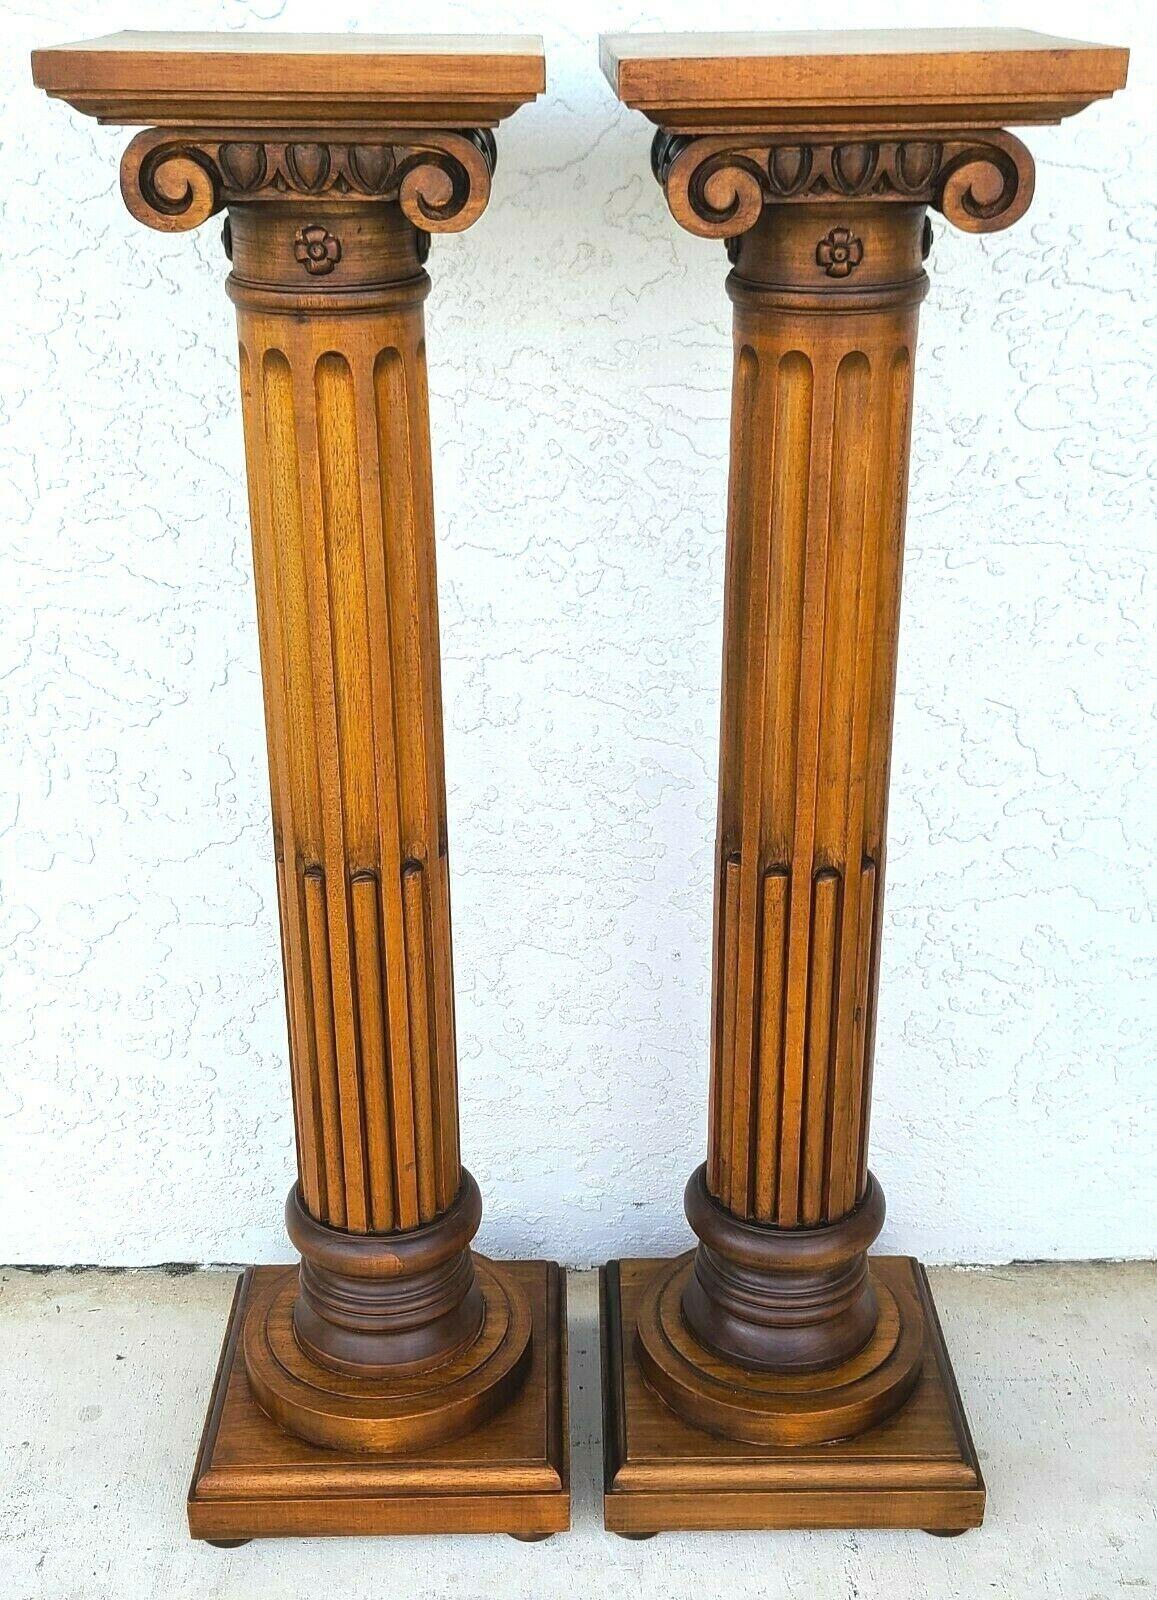 Neoclassical Walnut Pedestal Display Stands by Decorative Crafts Italy